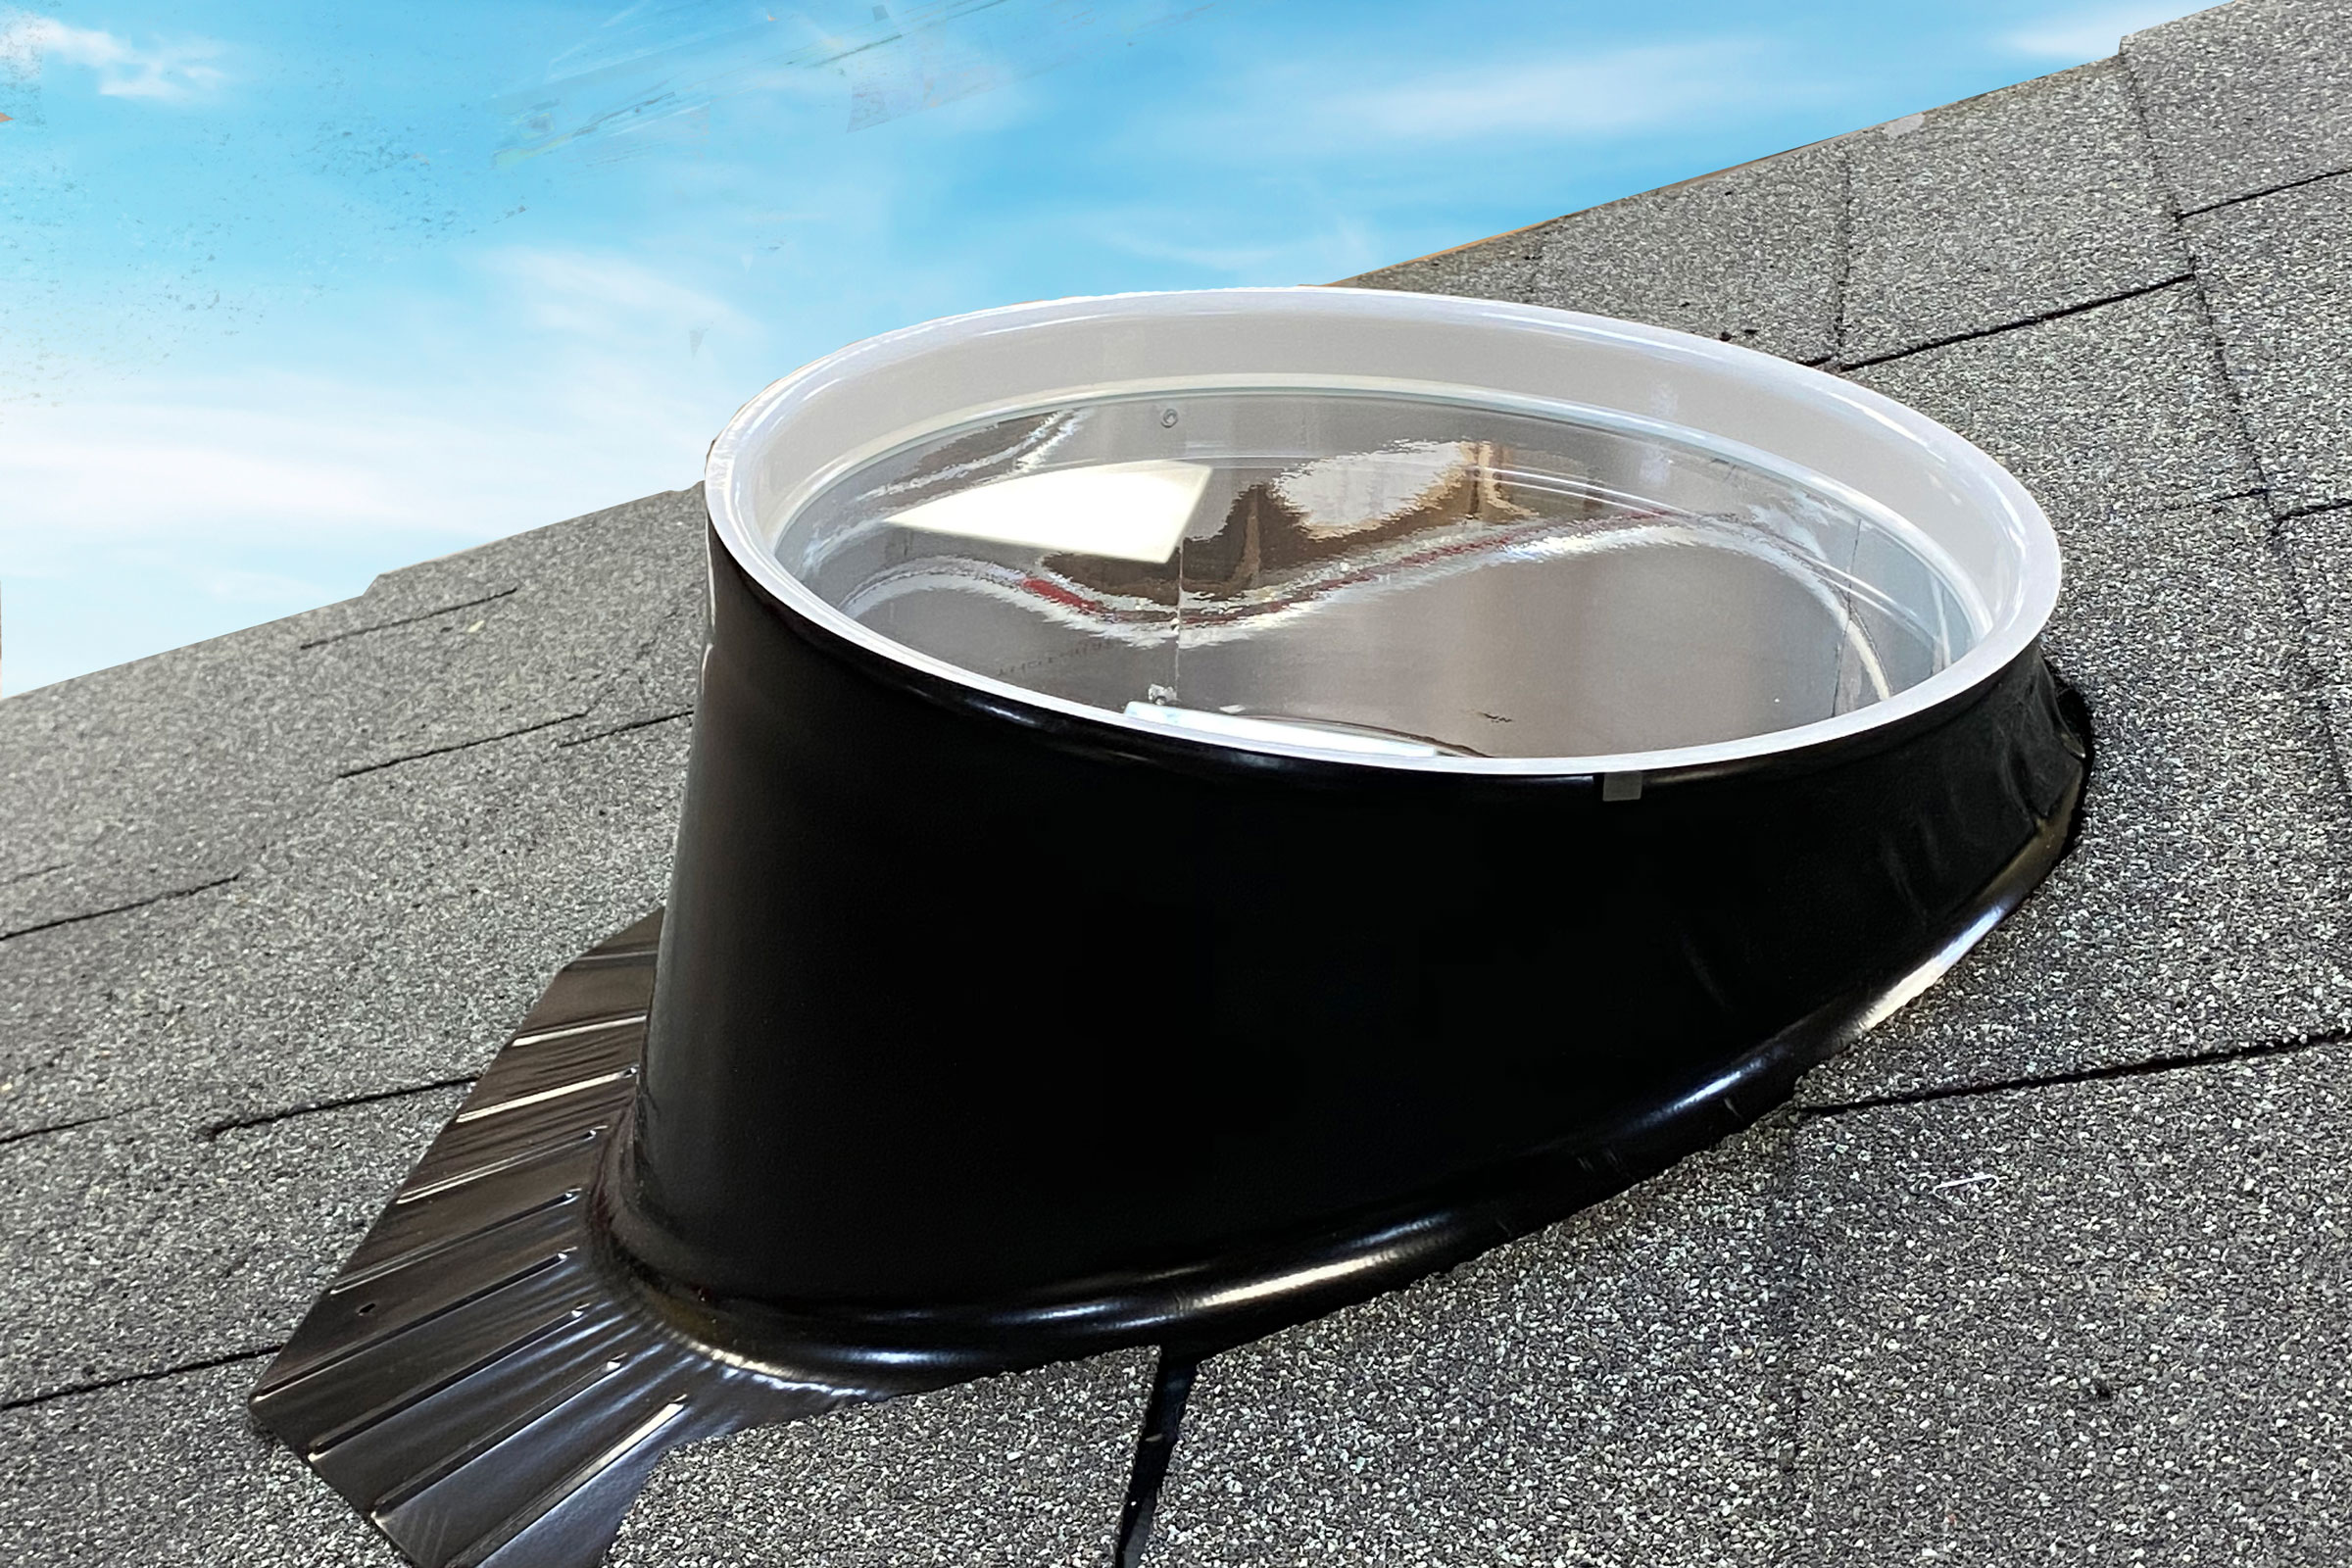 An outside view of black solatube on a grey ceramic roof